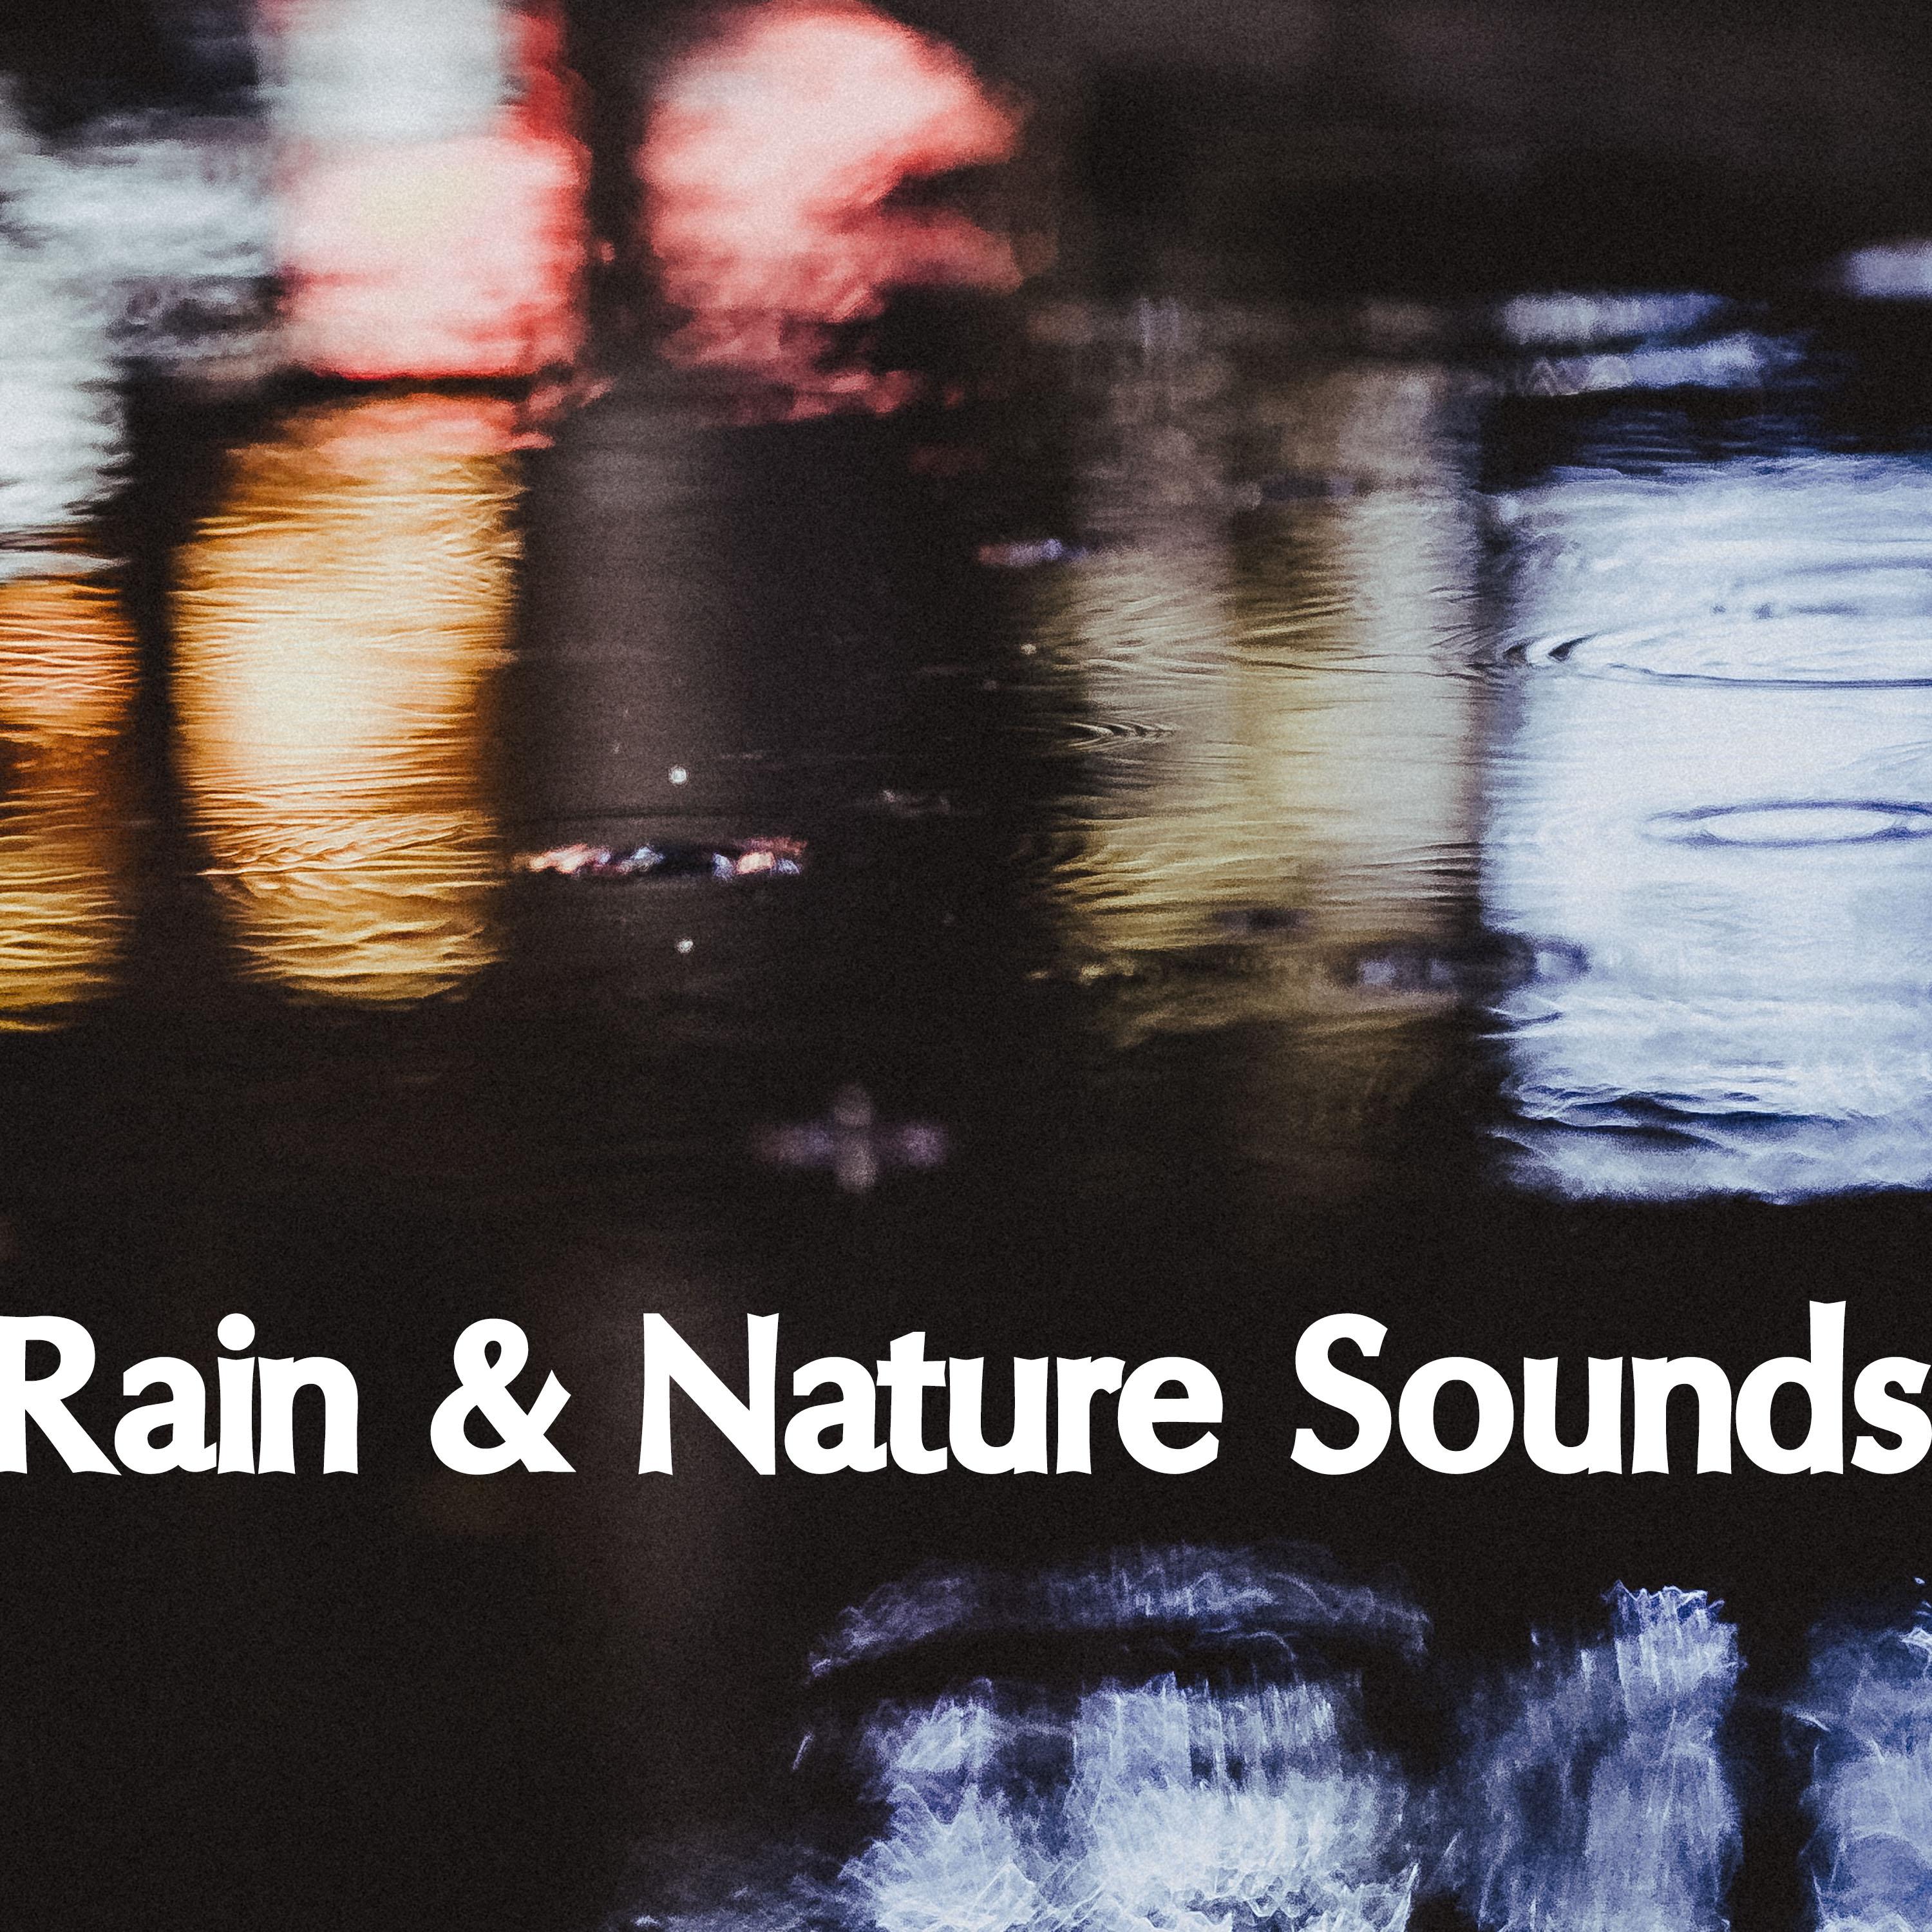 13 Rain and Nature Sounds to Help You Rest and Relax